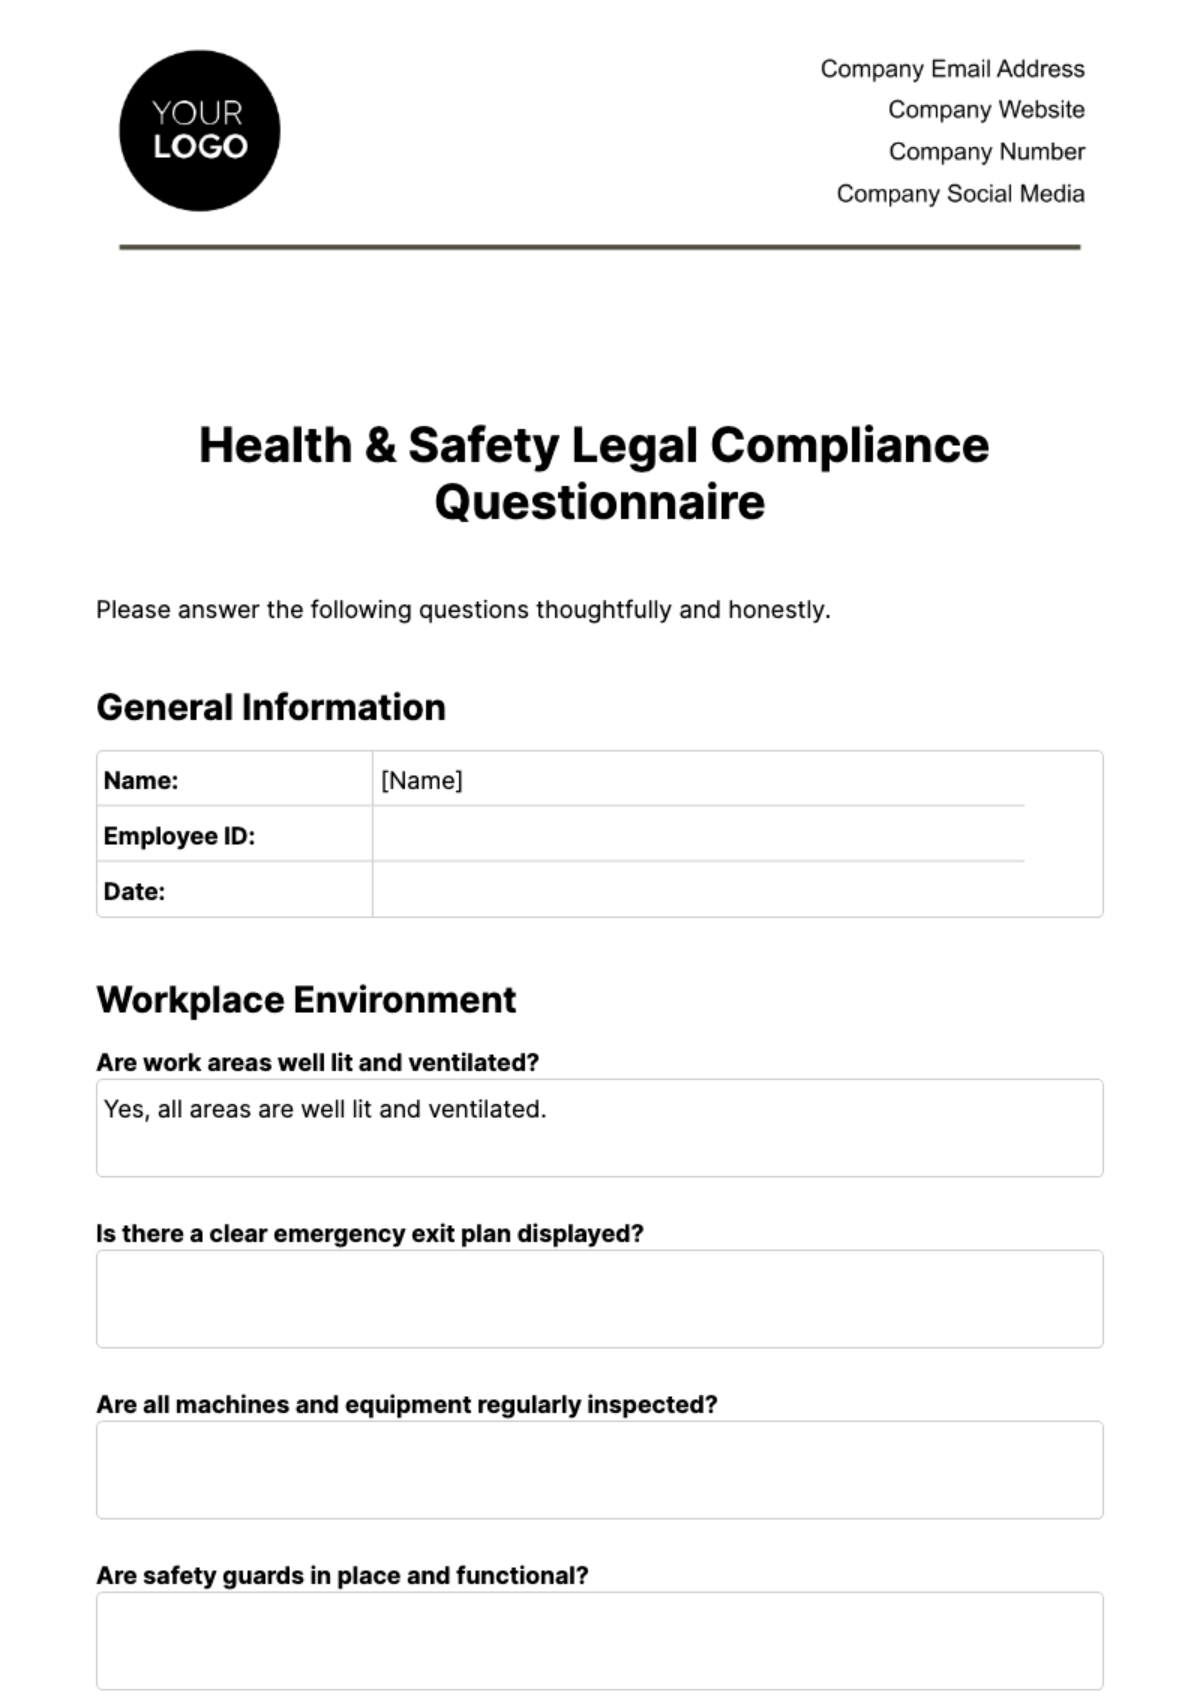 Health & Safety Legal Compliance Questionnaire Template